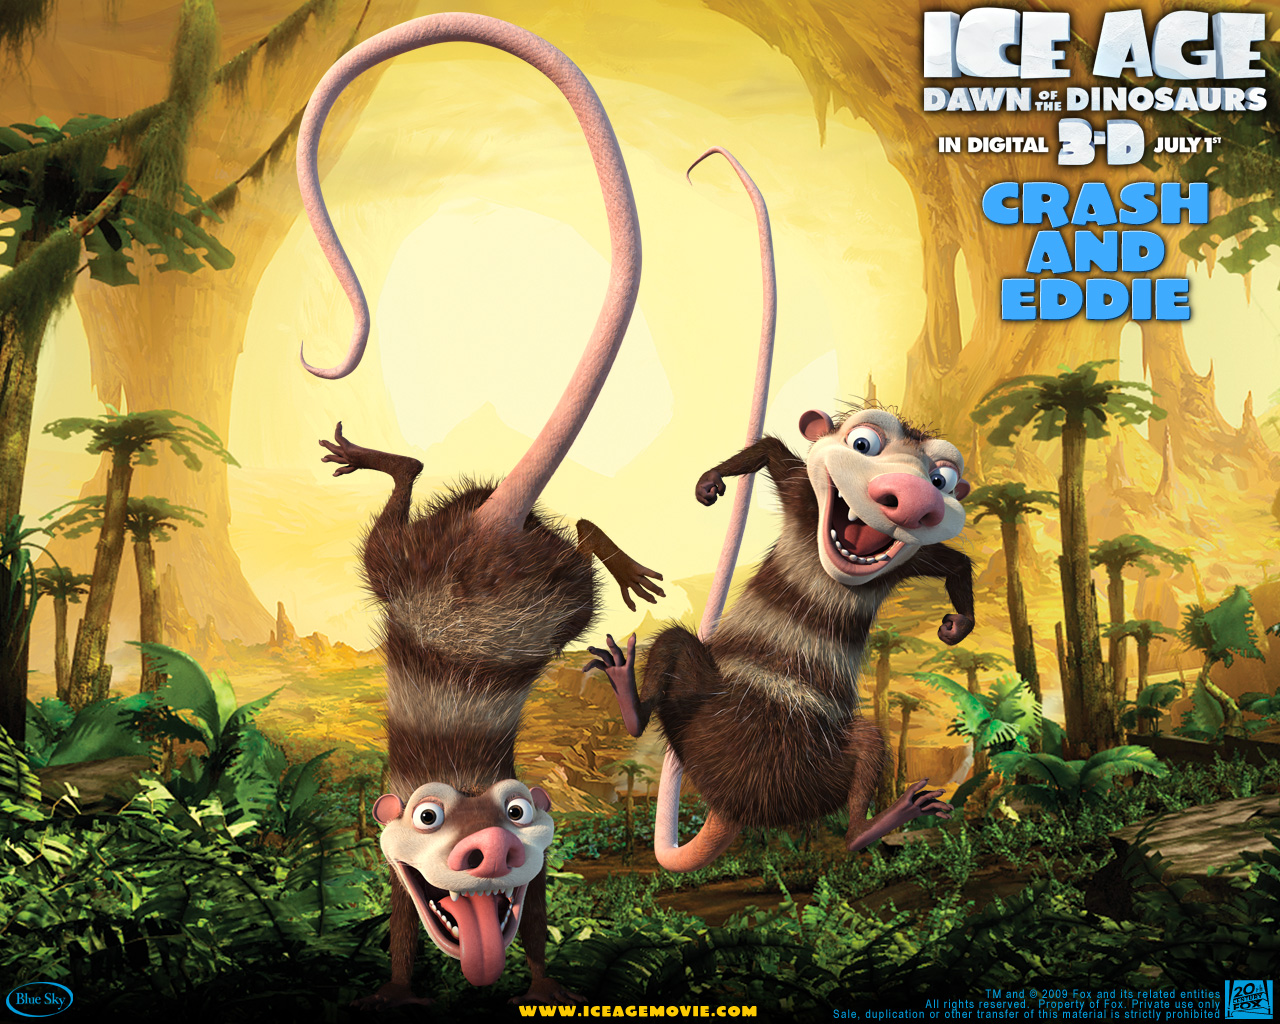 Ice Age: Dawn of the Dinosaurs **** (2009, voices of Ray Romano, Denis